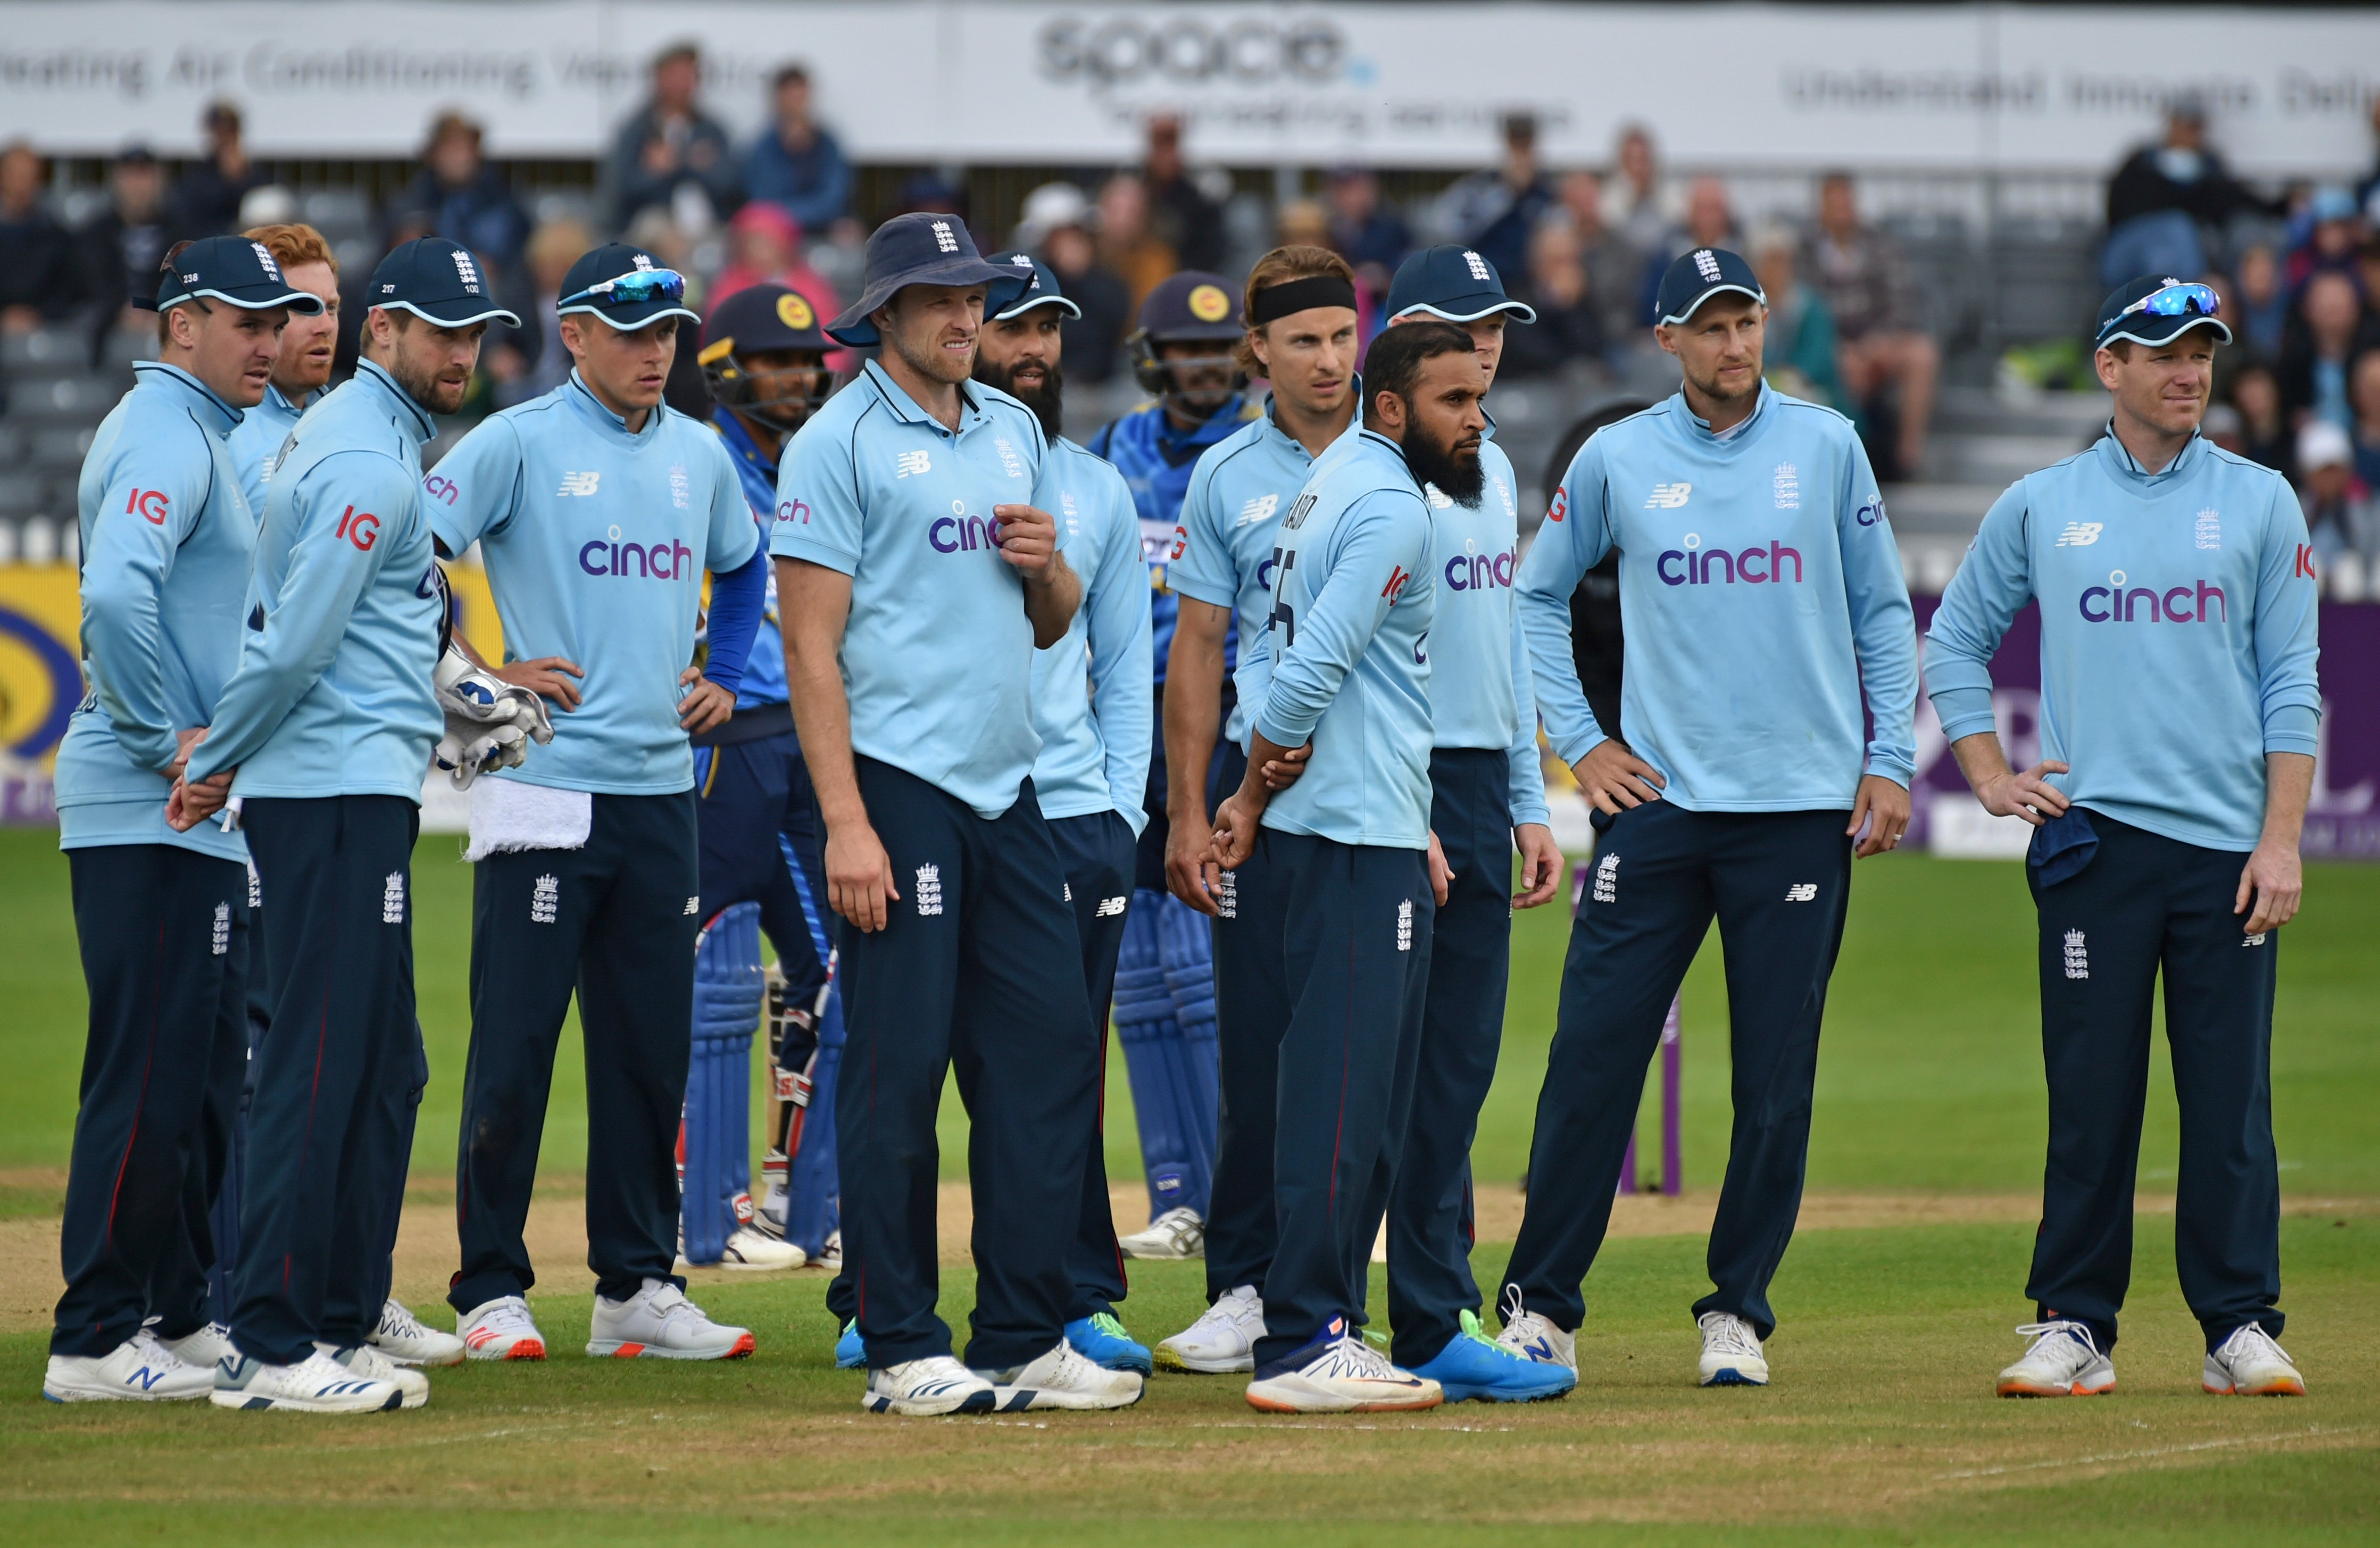 The England ODI squad on the pitch